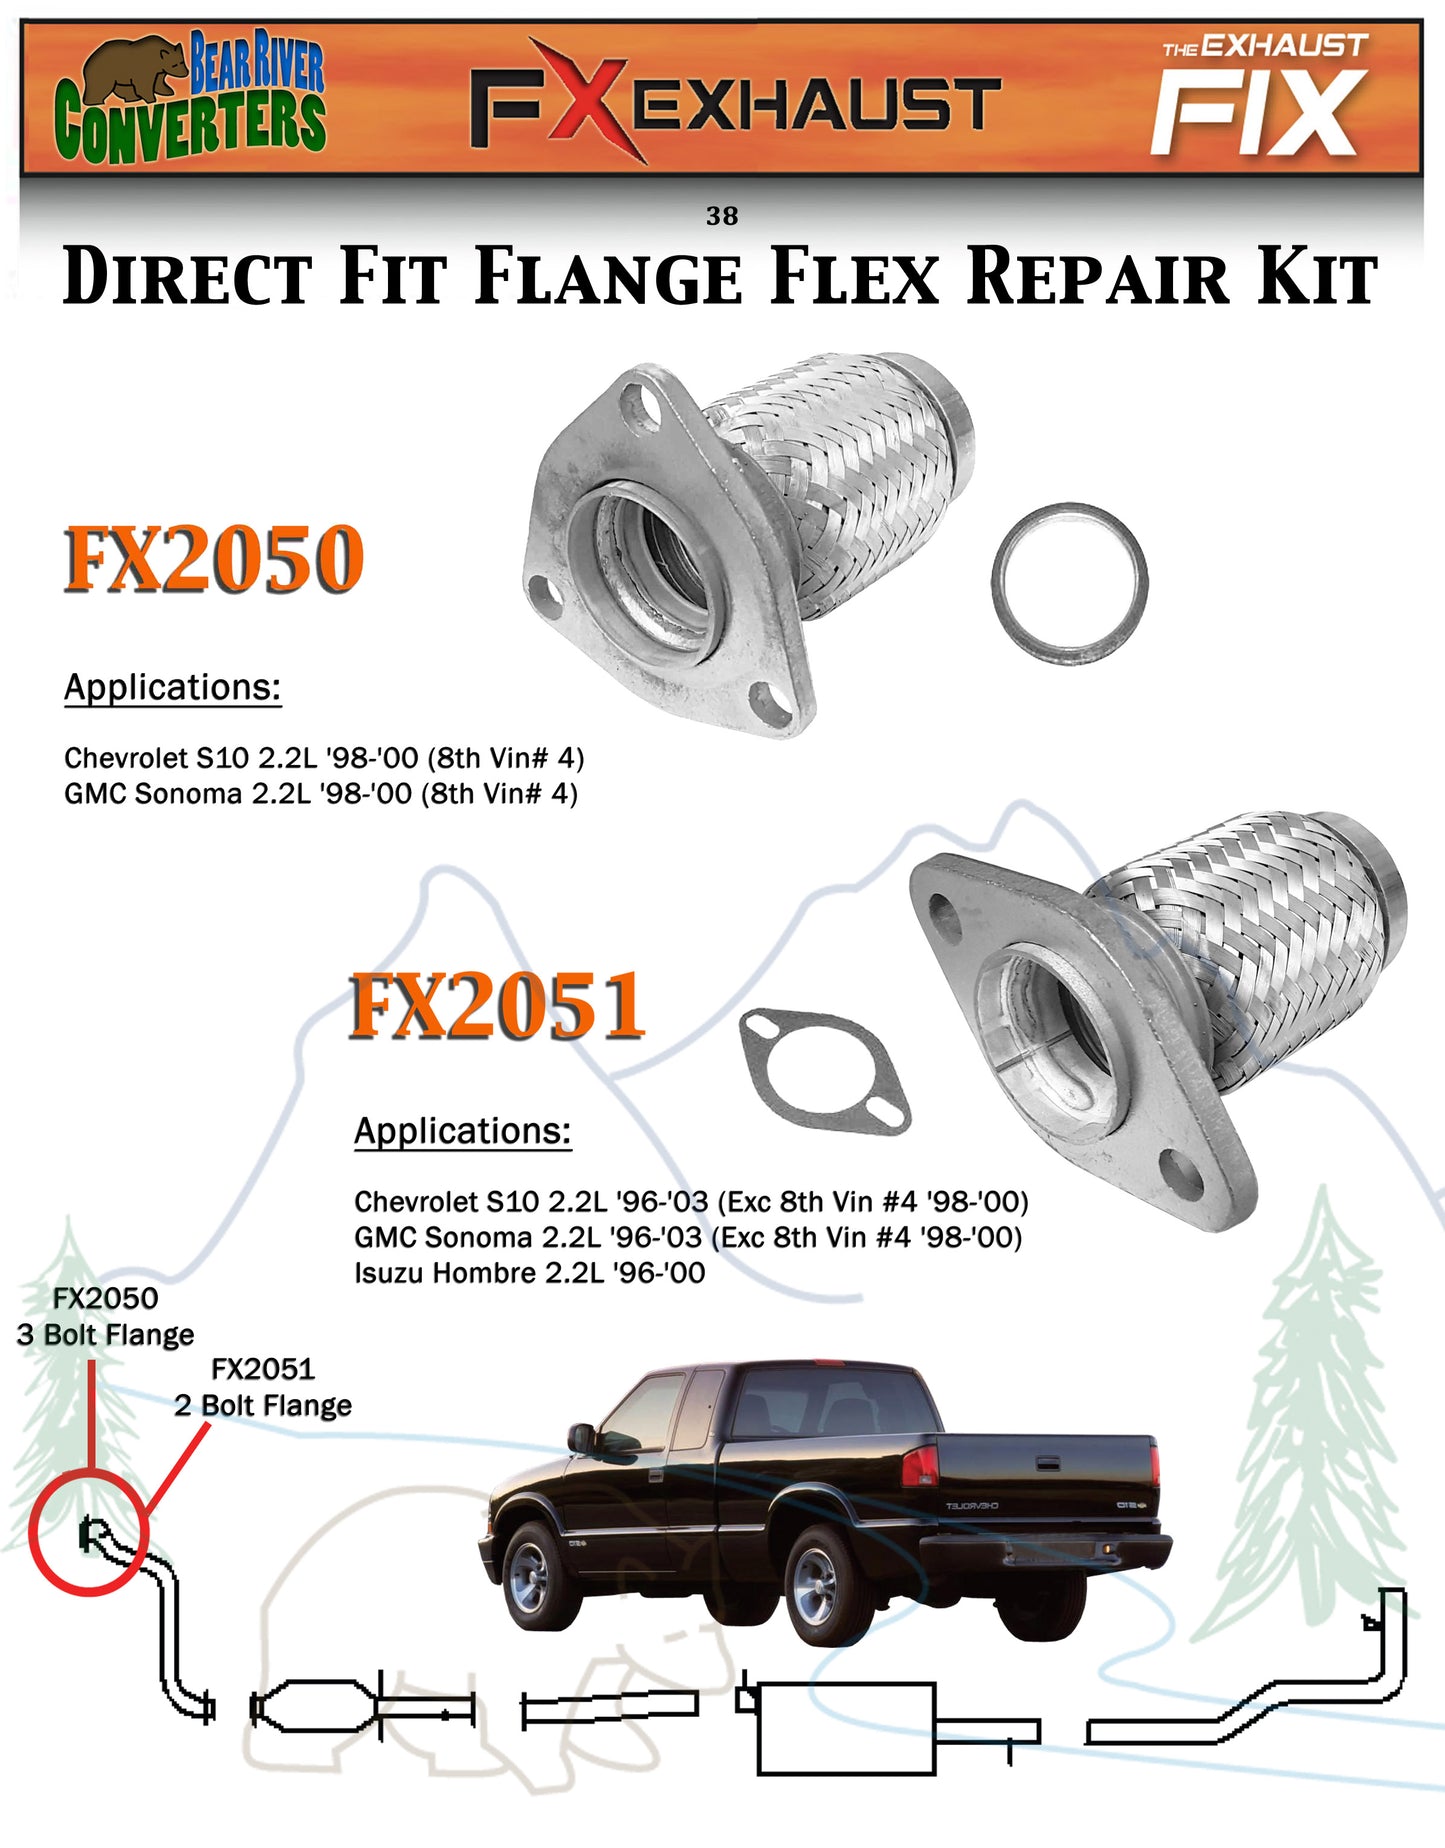 FX2051 Semi Direct Fit Exhaust Flange Repair Flex Pipe Replacement Kit With Gasket